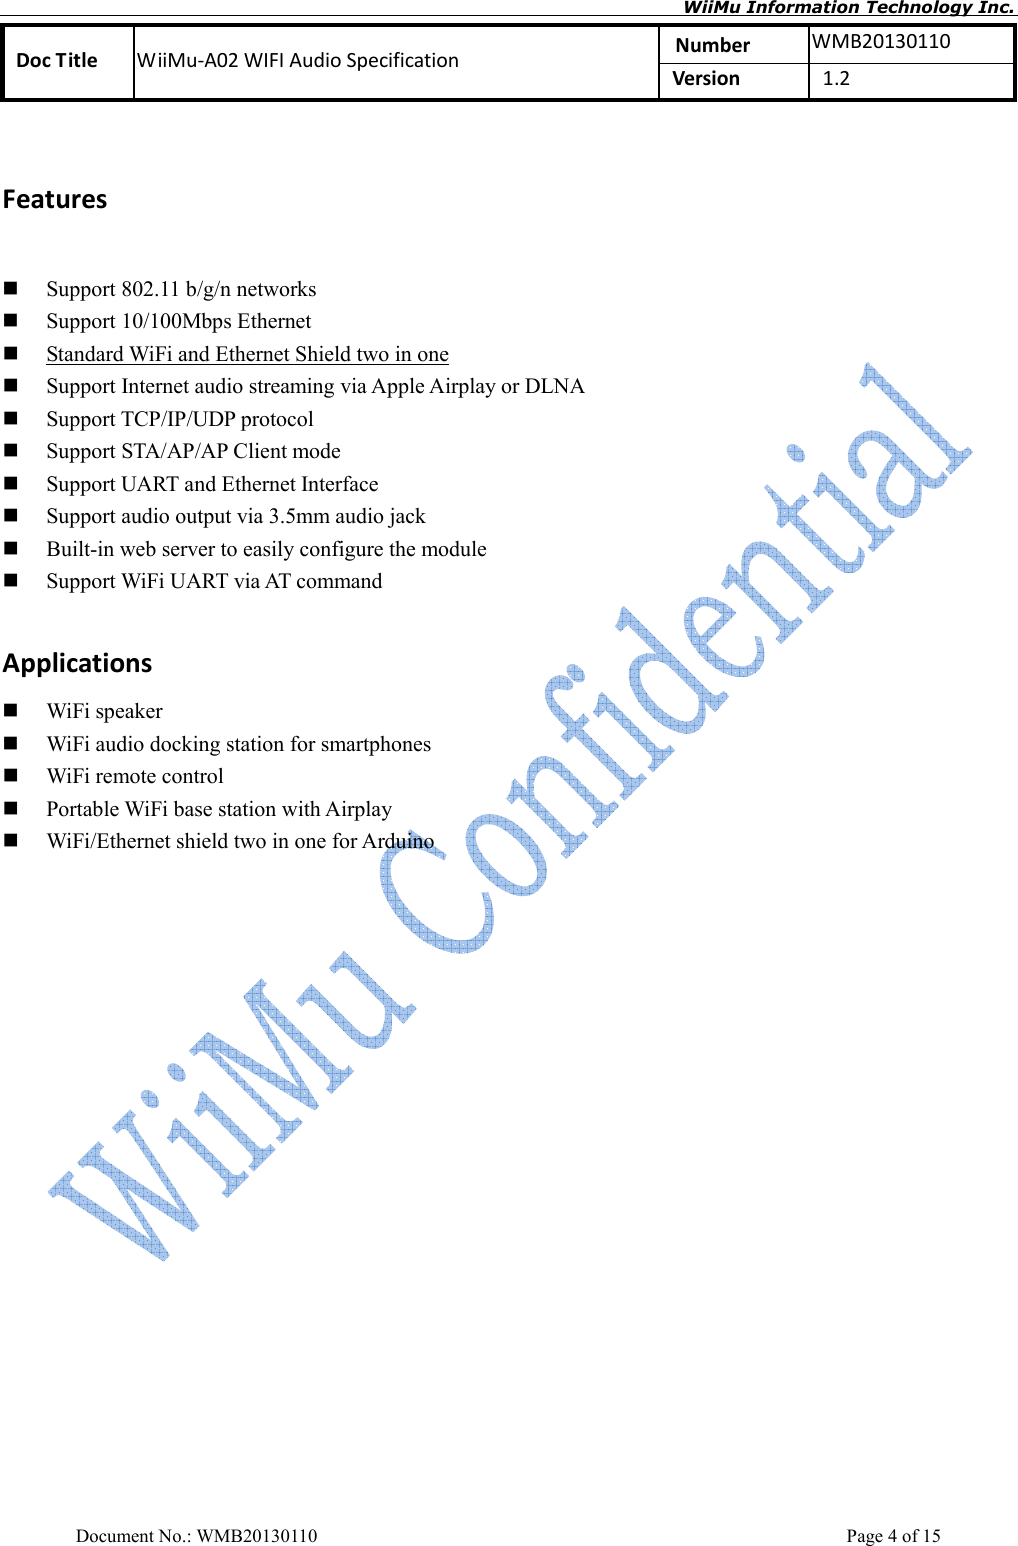       WiiMu Information Technology Inc. Number  WMB20130110 Doc Title  WiiMu-A02 WIFI Audio Specification  Version    1.2  Document No.: WMB20130110    Page 4 of 15 Features  Support 802.11 b/g/n networks  Support 10/100Mbps Ethernet    Standard WiFi and Ethernet Shield two in one  Support Internet audio streaming via Apple Airplay or DLNA  Support TCP/IP/UDP protocol  Support STA/AP/AP Client mode  Support UART and Ethernet Interface  Support audio output via 3.5mm audio jack  Built-in web server to easily configure the module  Support WiFi UART via AT command  Applications  WiFi speaker    WiFi audio docking station for smartphones  WiFi remote control  Portable WiFi base station with Airplay  WiFi/Ethernet shield two in one for Arduino                                  